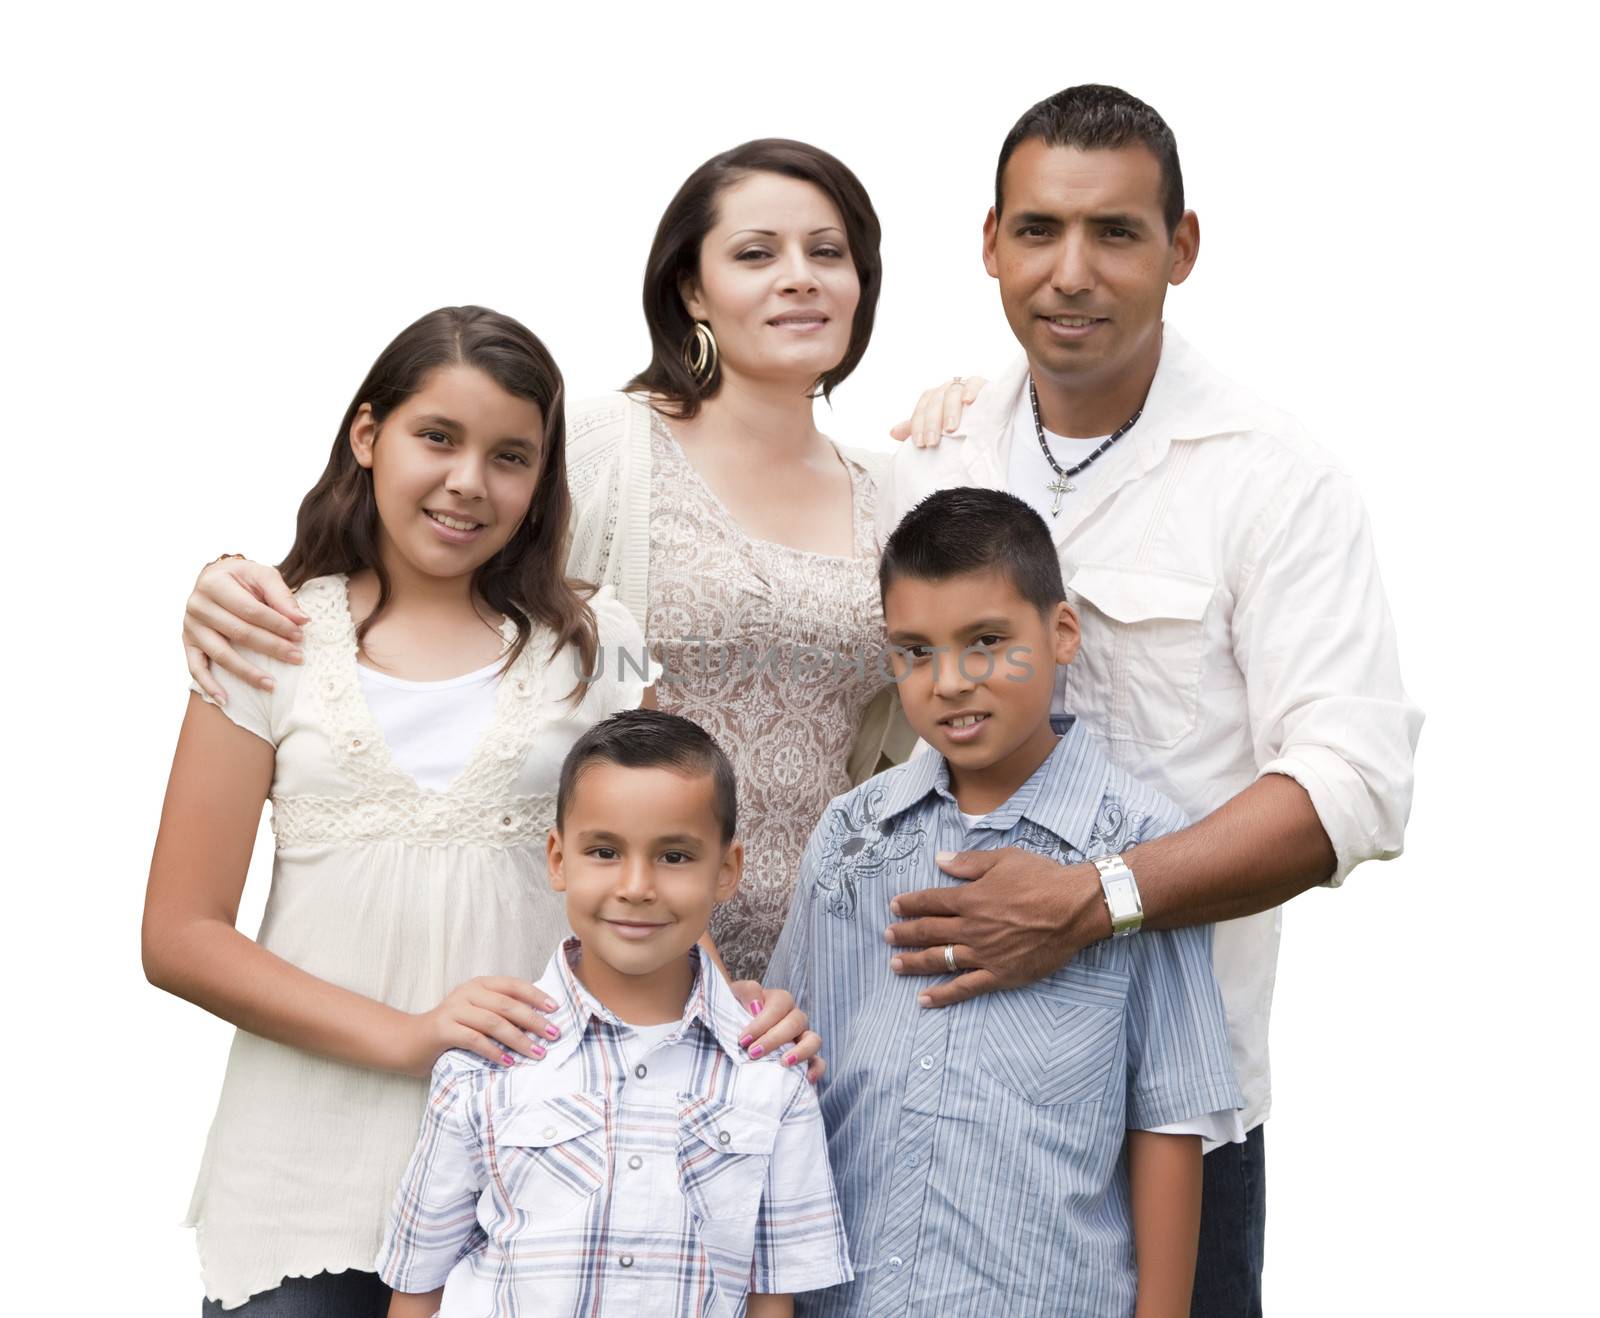 Happy Attractive Hispanic Family Portrait on White by Feverpitched